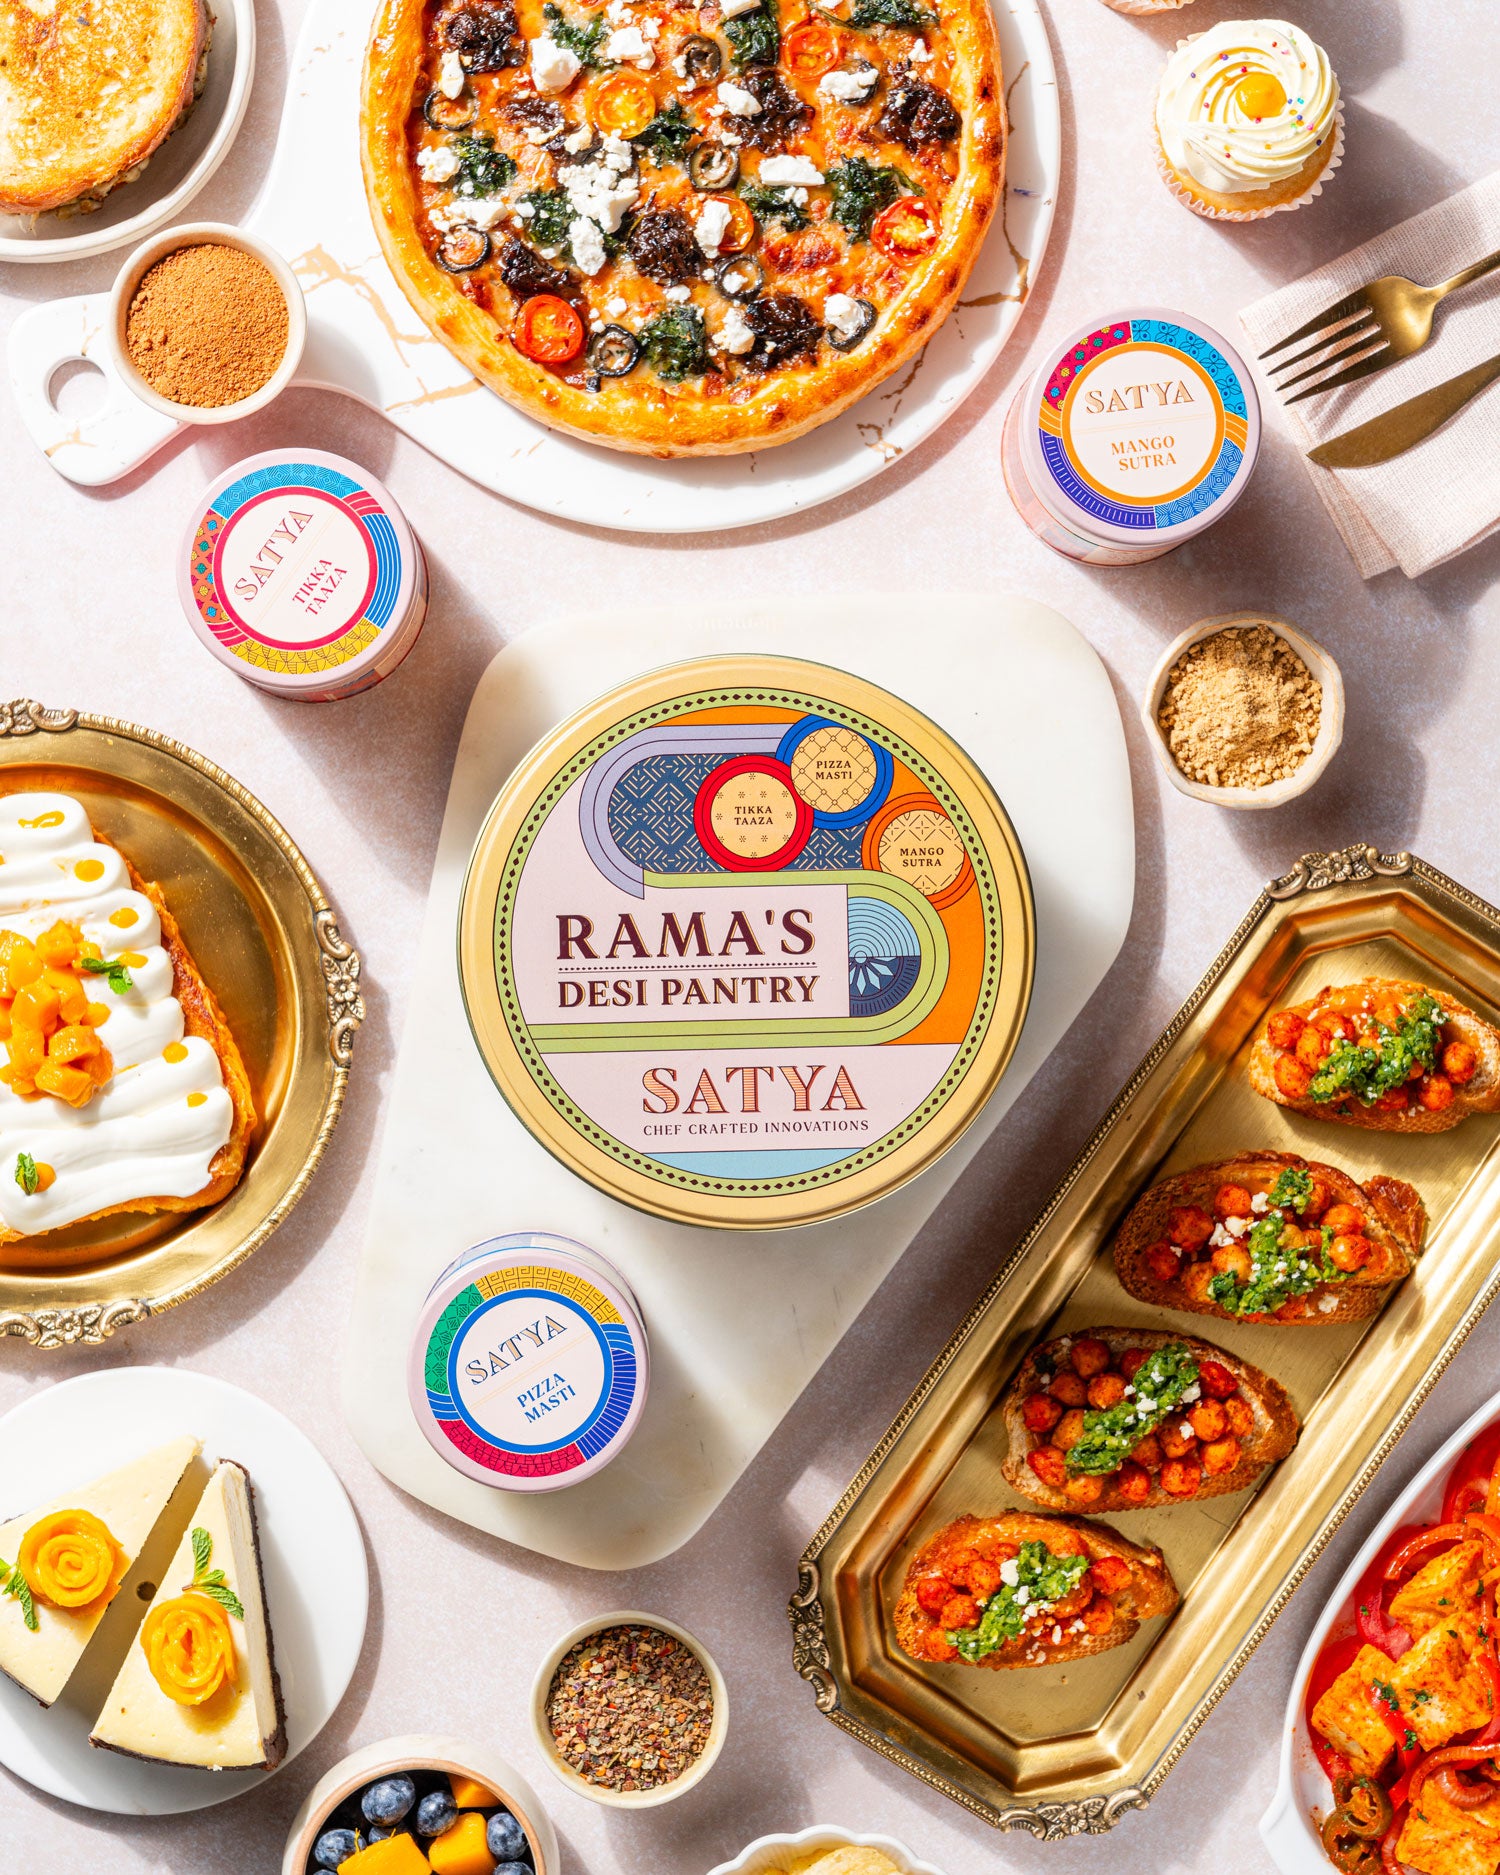 Rama's Desi Pantry - Satya Blends Indian Spices